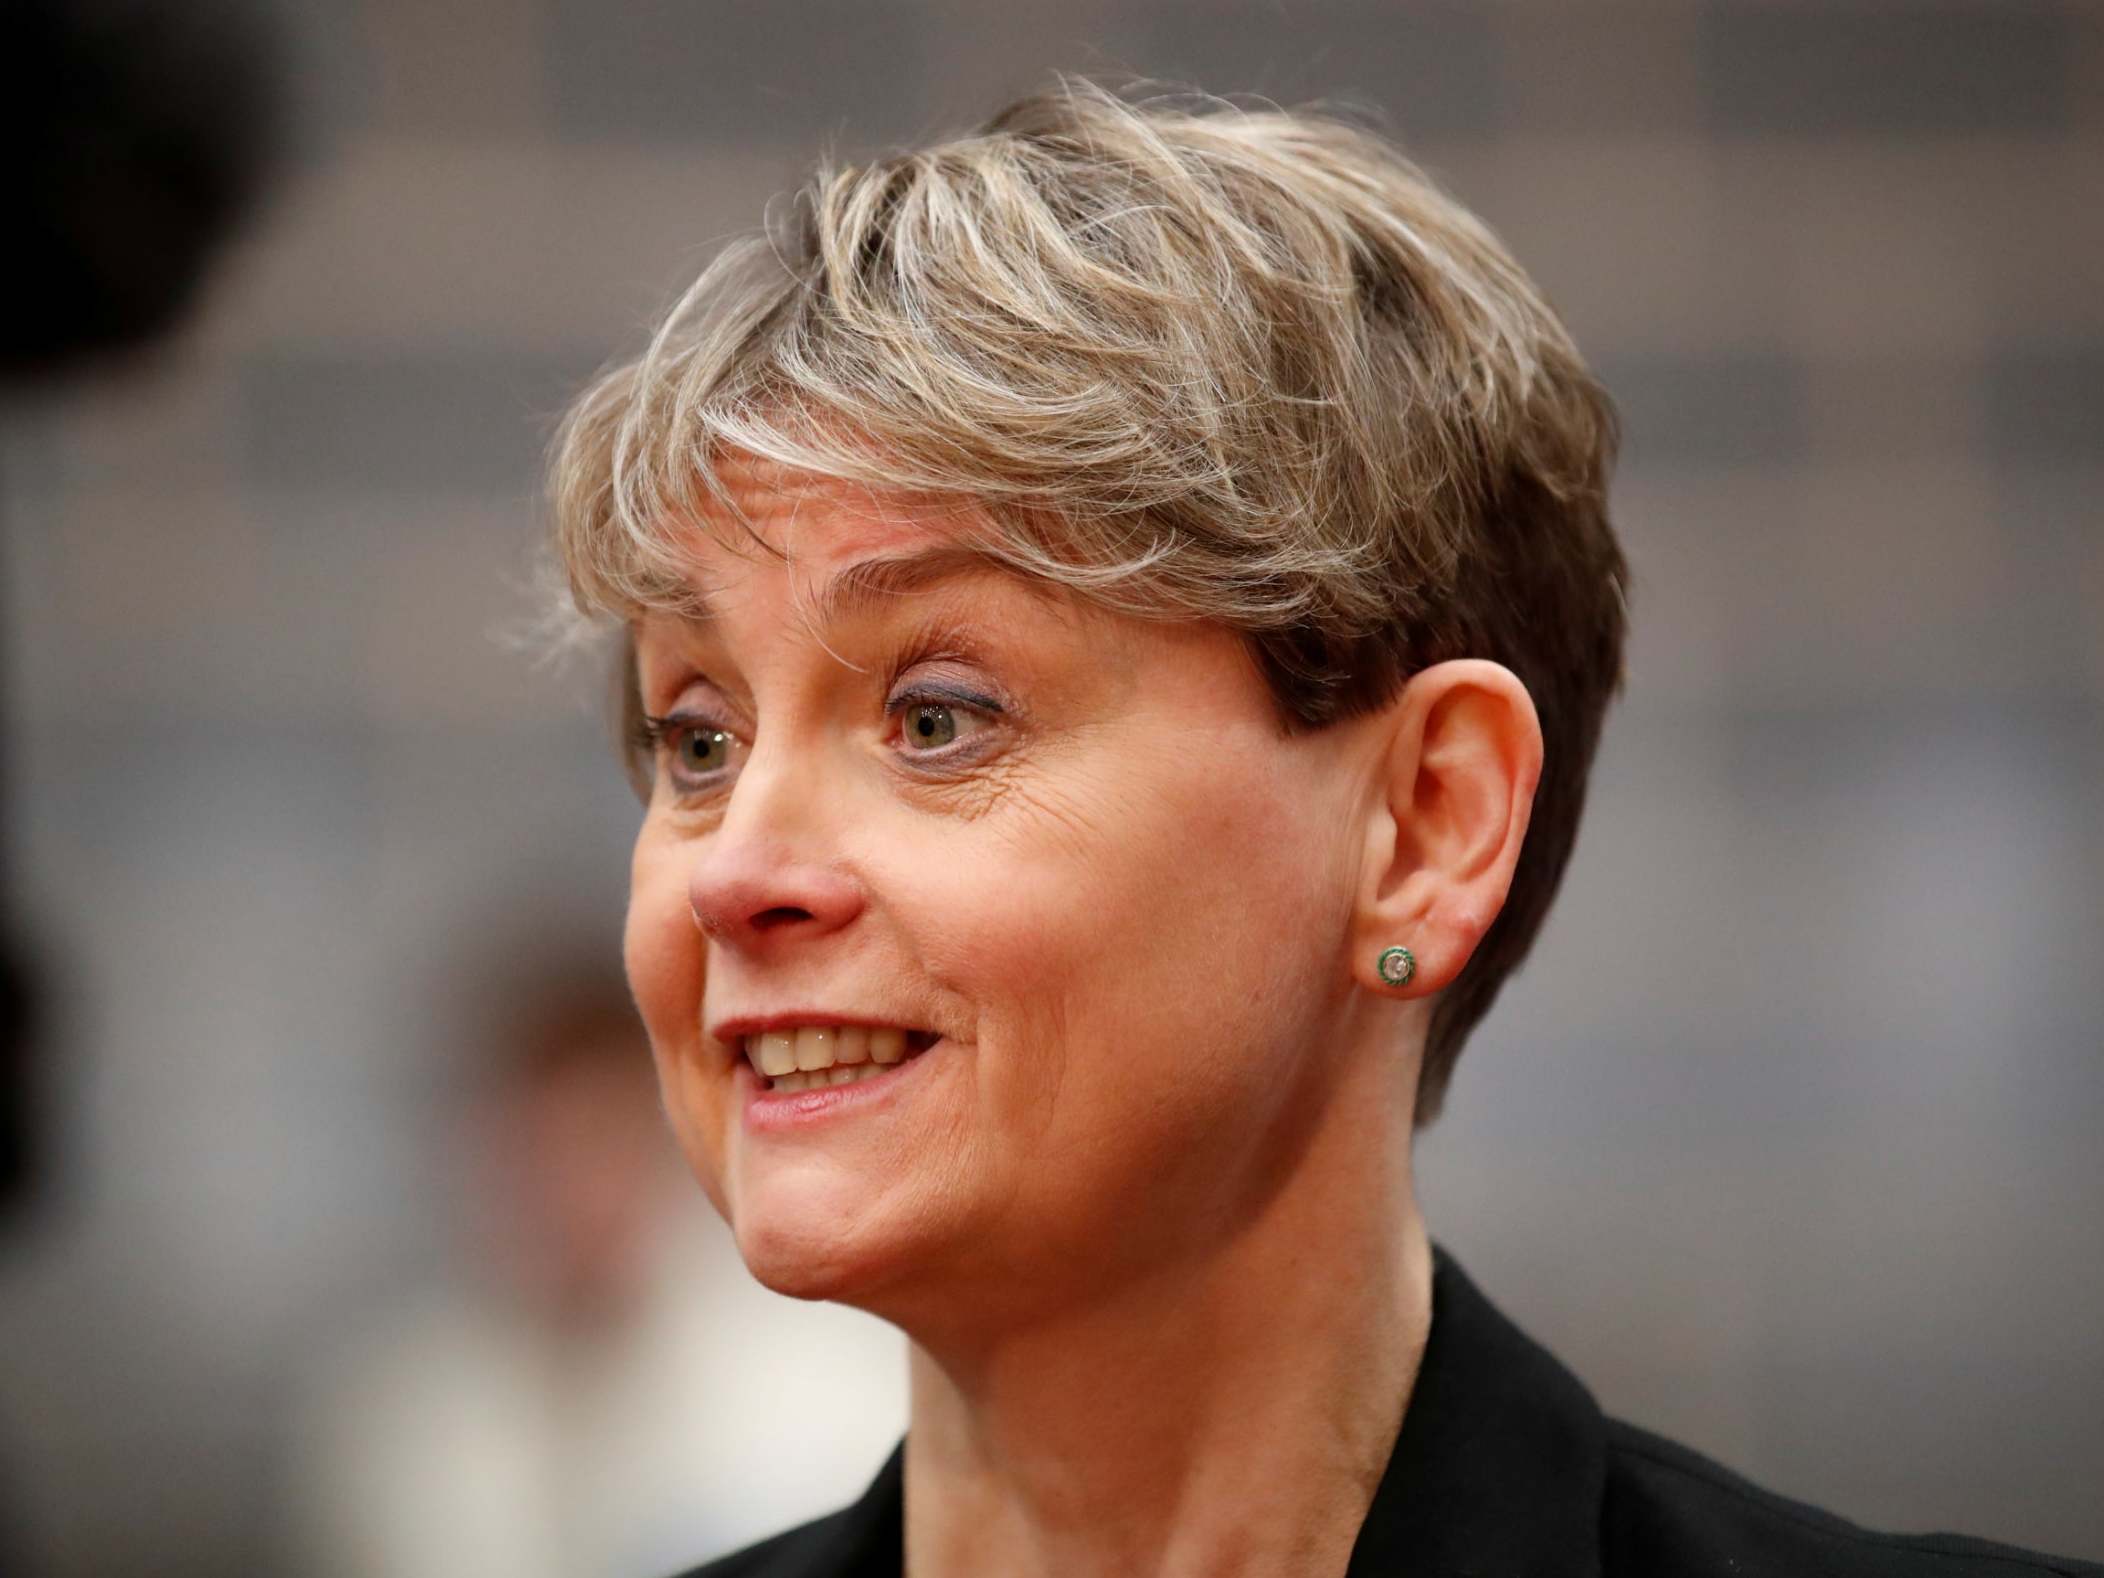 Yvette Cooper Tory Candidate Jailed Over Threatening…